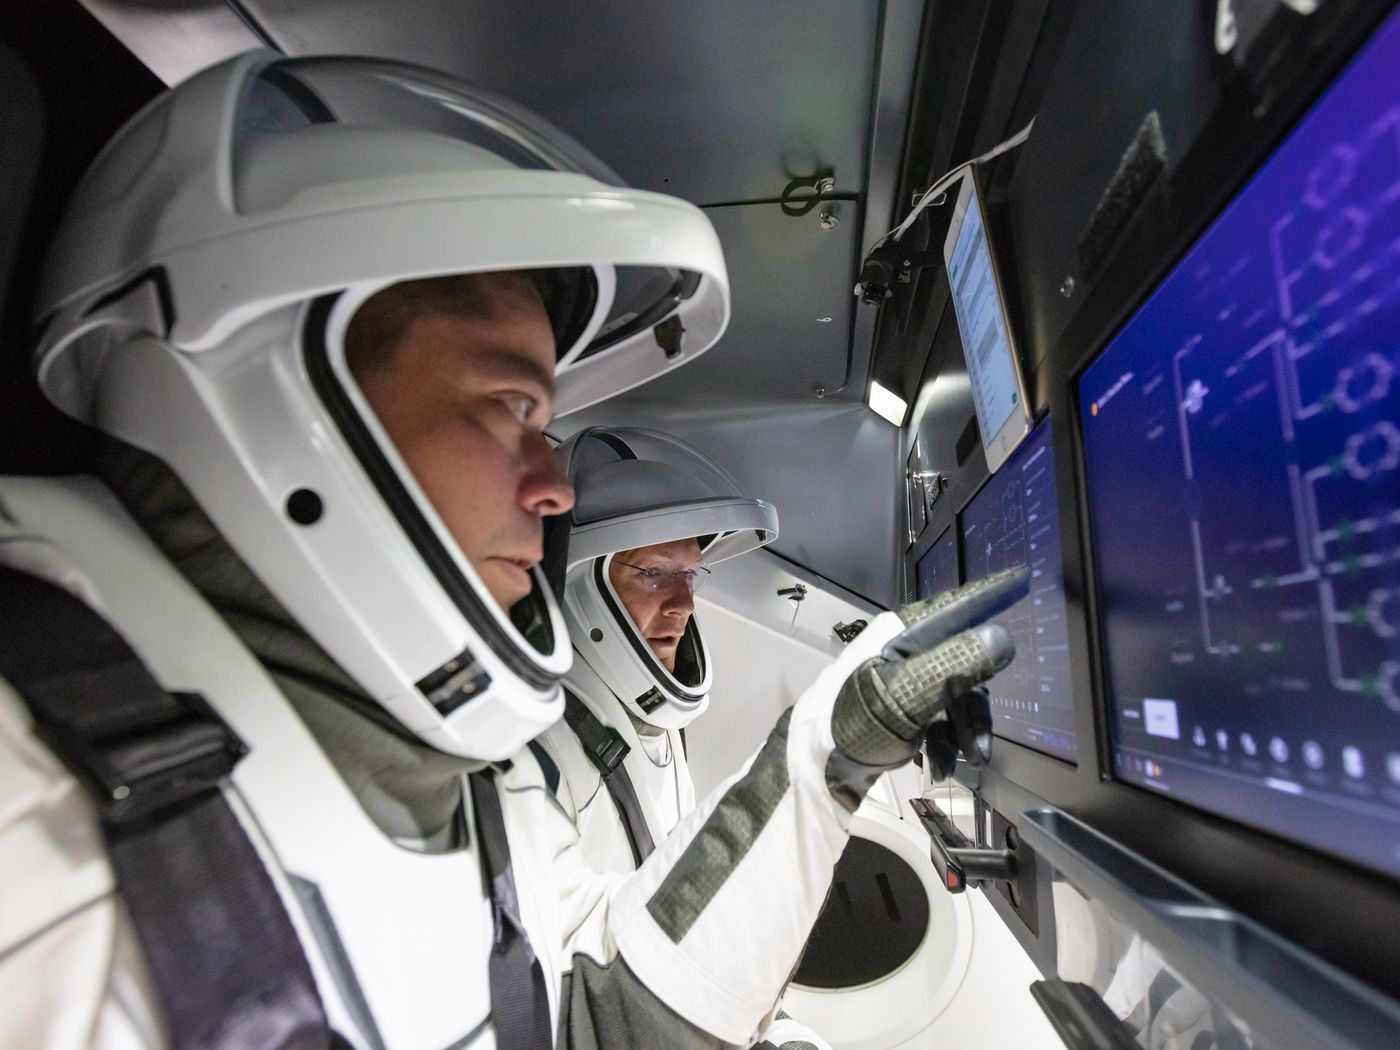 SpaceX's Crew Dragon slated to bring NASA astronauts home for the first time this weekend